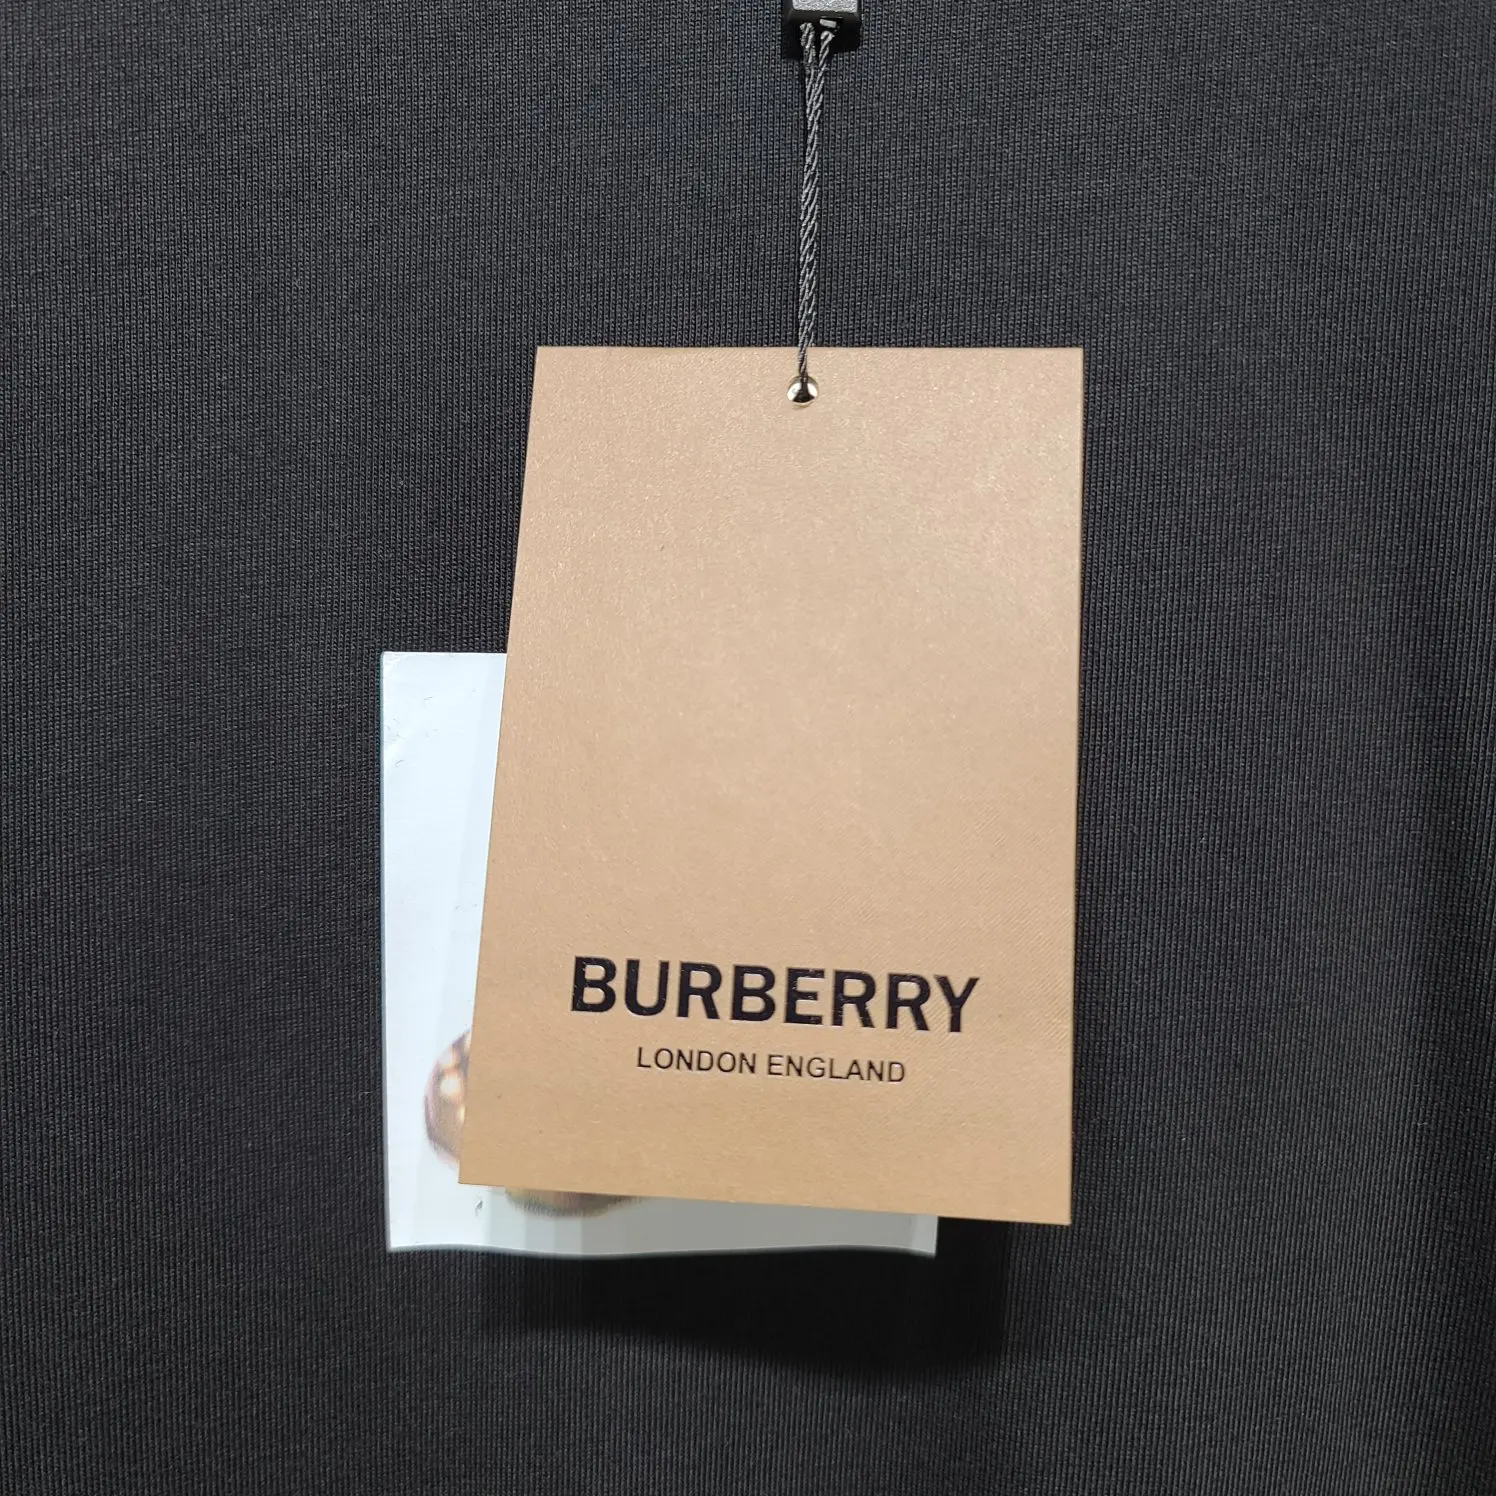 BURBERRY 2022ss new T-shirt in black